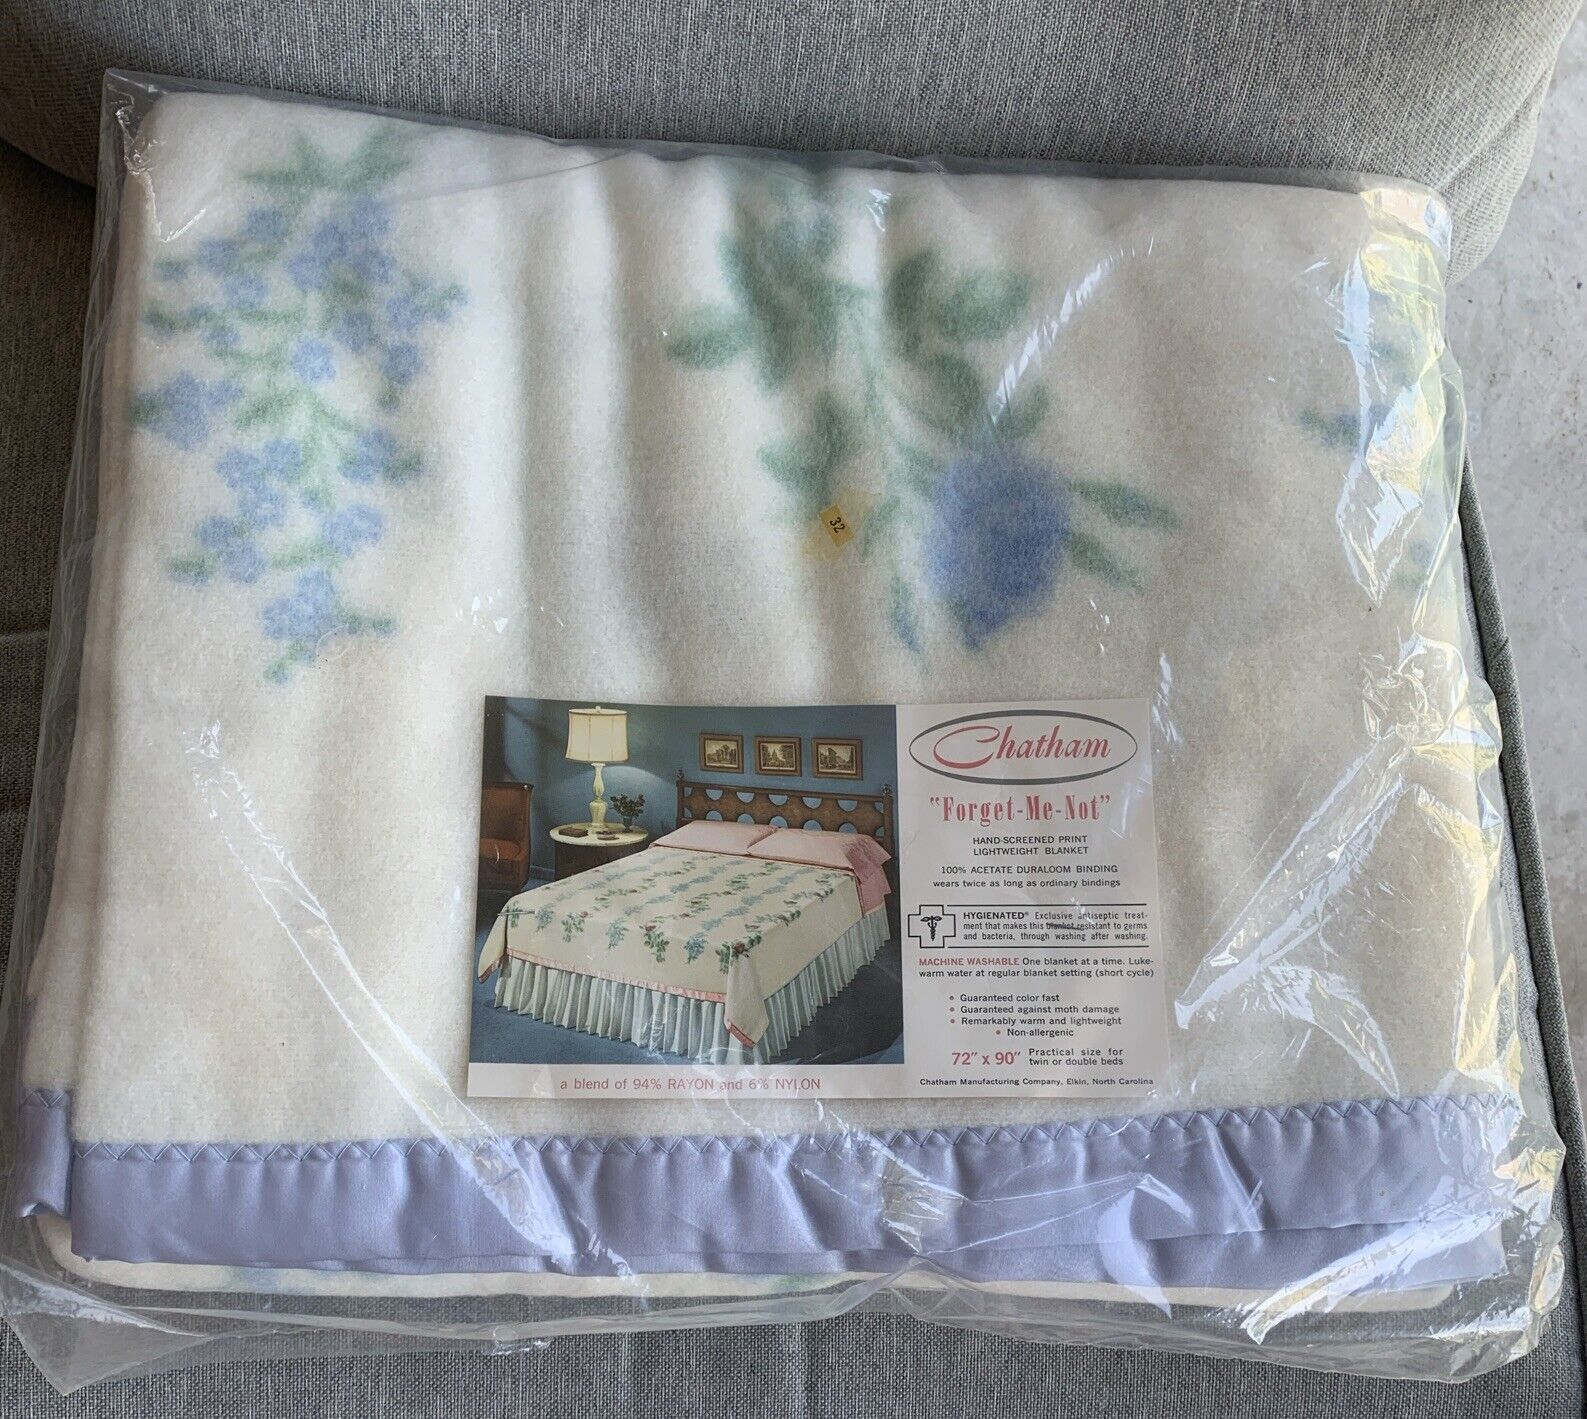 NEW Vintage Chatham “Forget Me Not” Floral White Blanket w/ Satin Trim 72x90